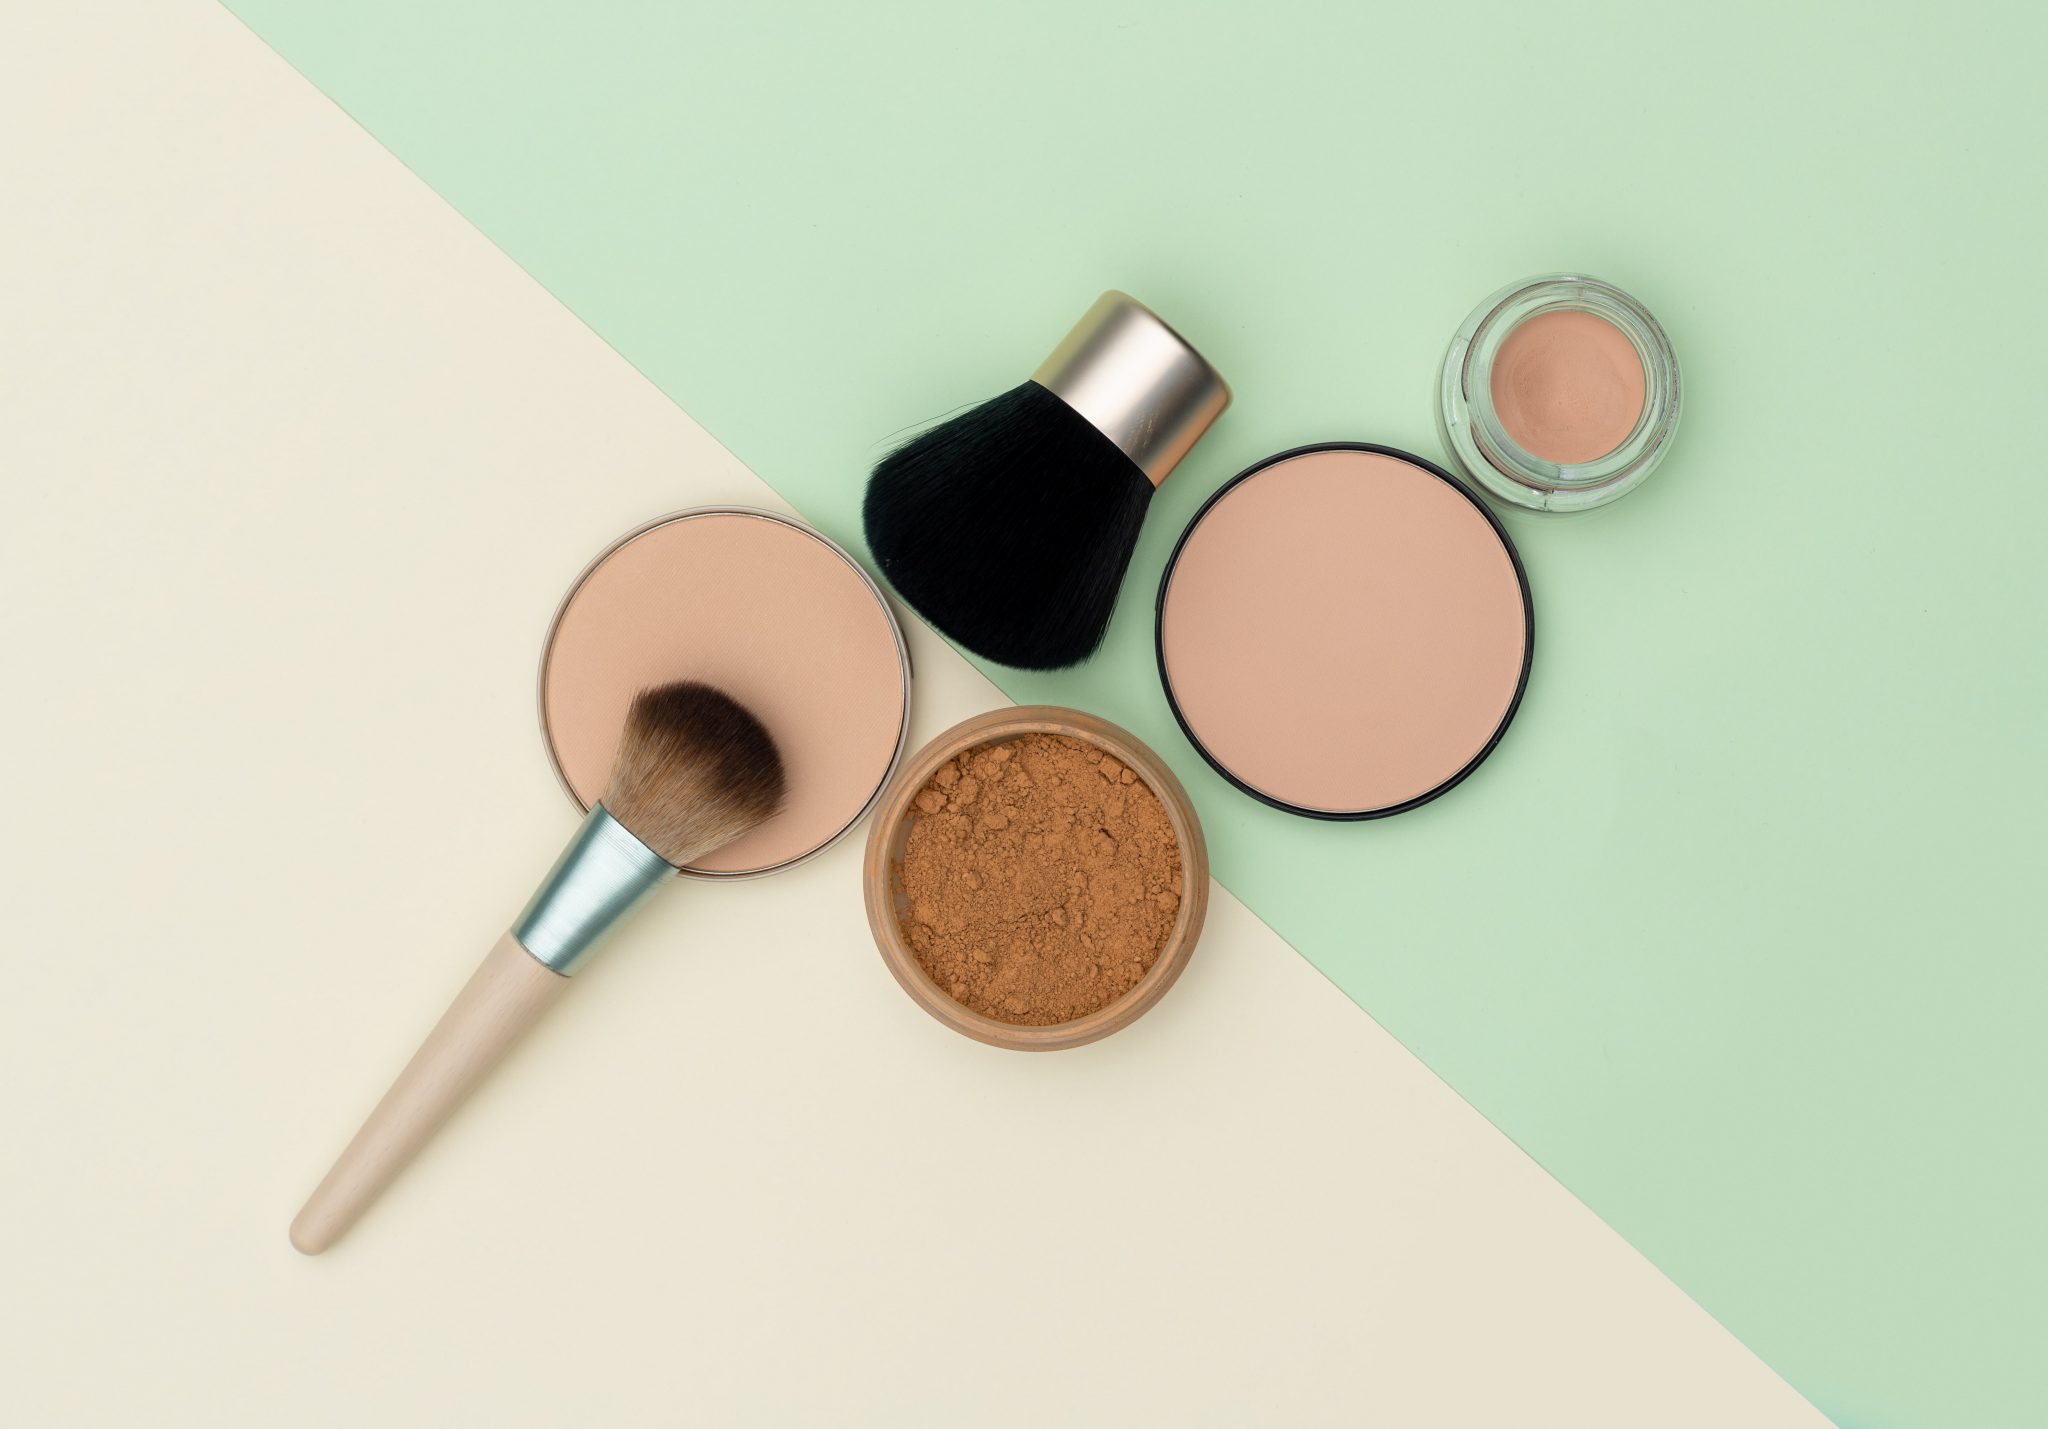 Are wax based foundations good for skin? Pros and cons and how to use it.